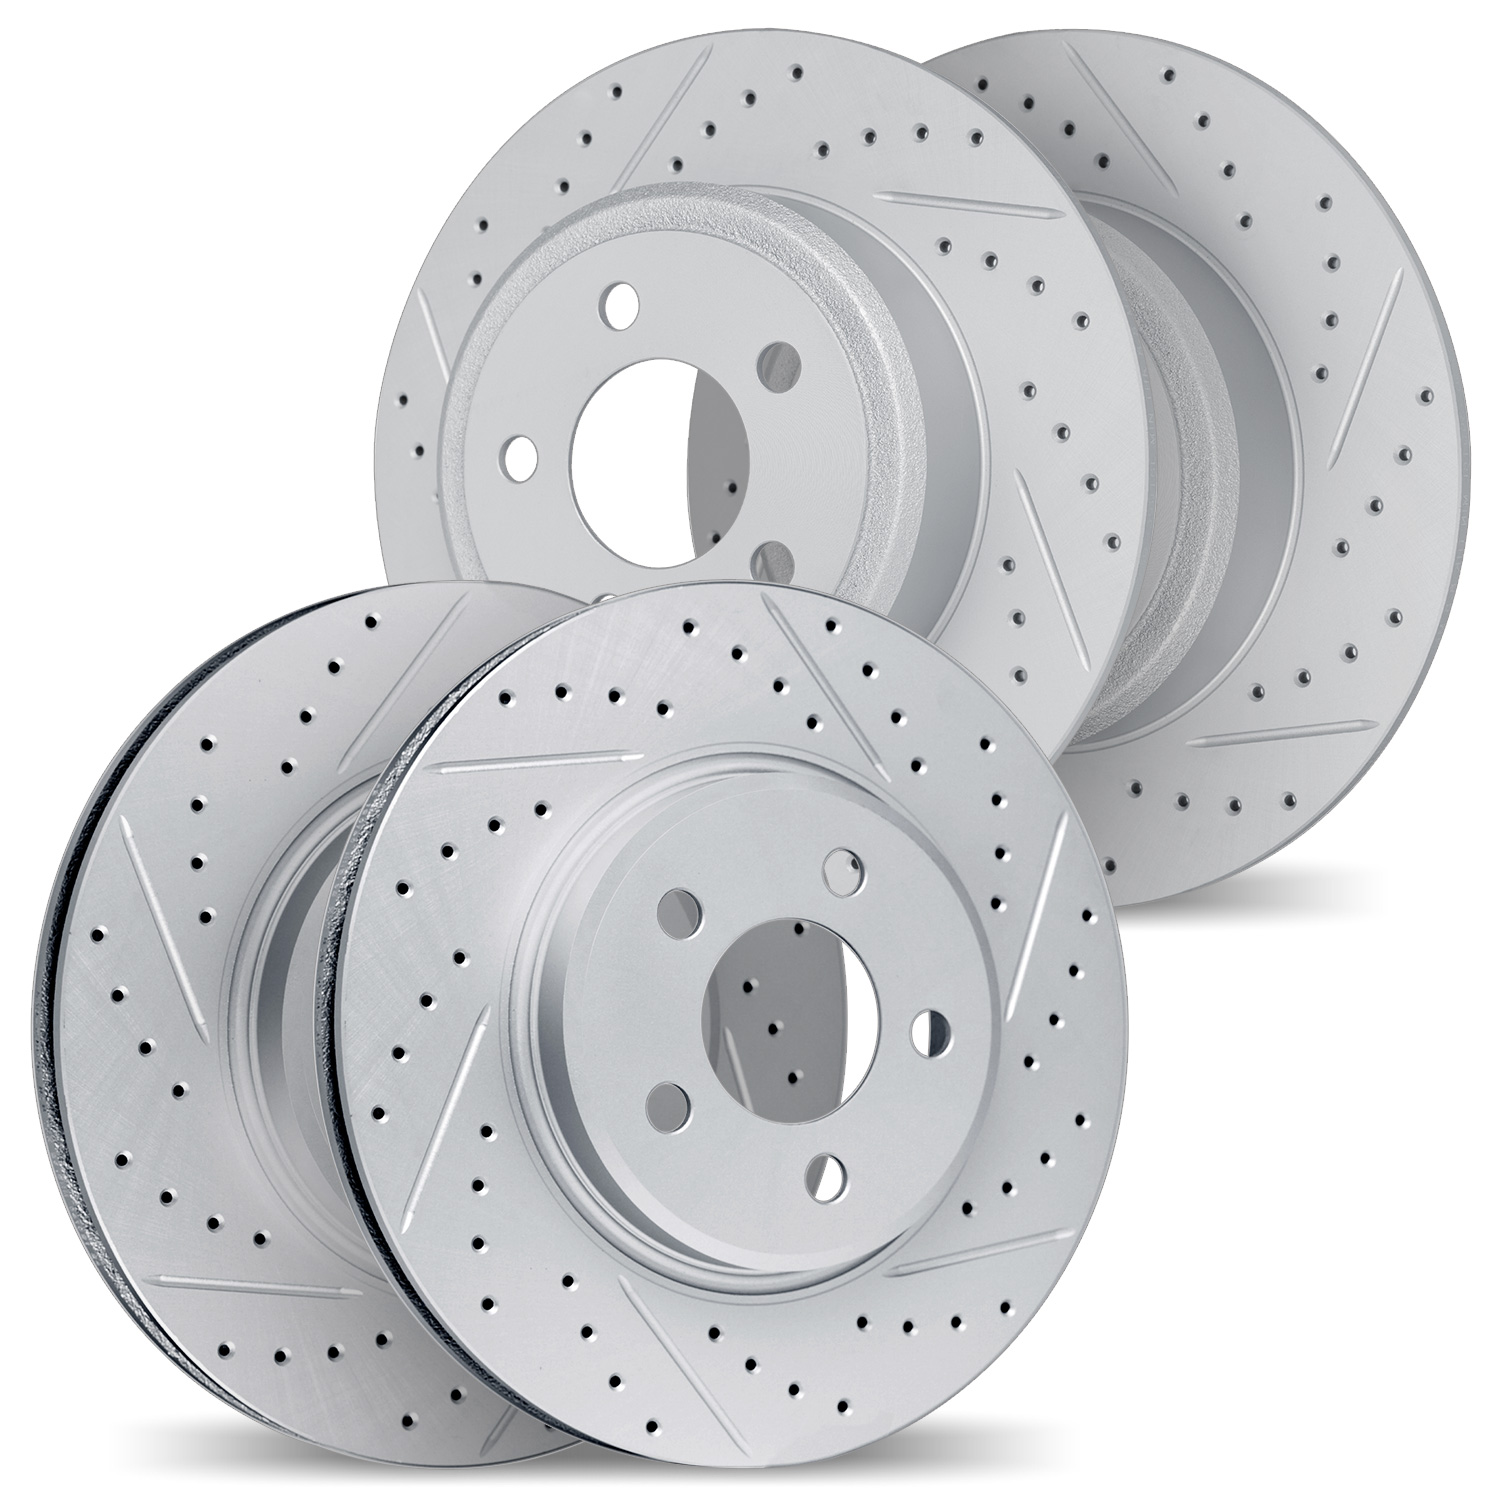 2004-47024 Geoperformance Drilled/Slotted Brake Rotors, Fits Select GM, Position: Front and Rear